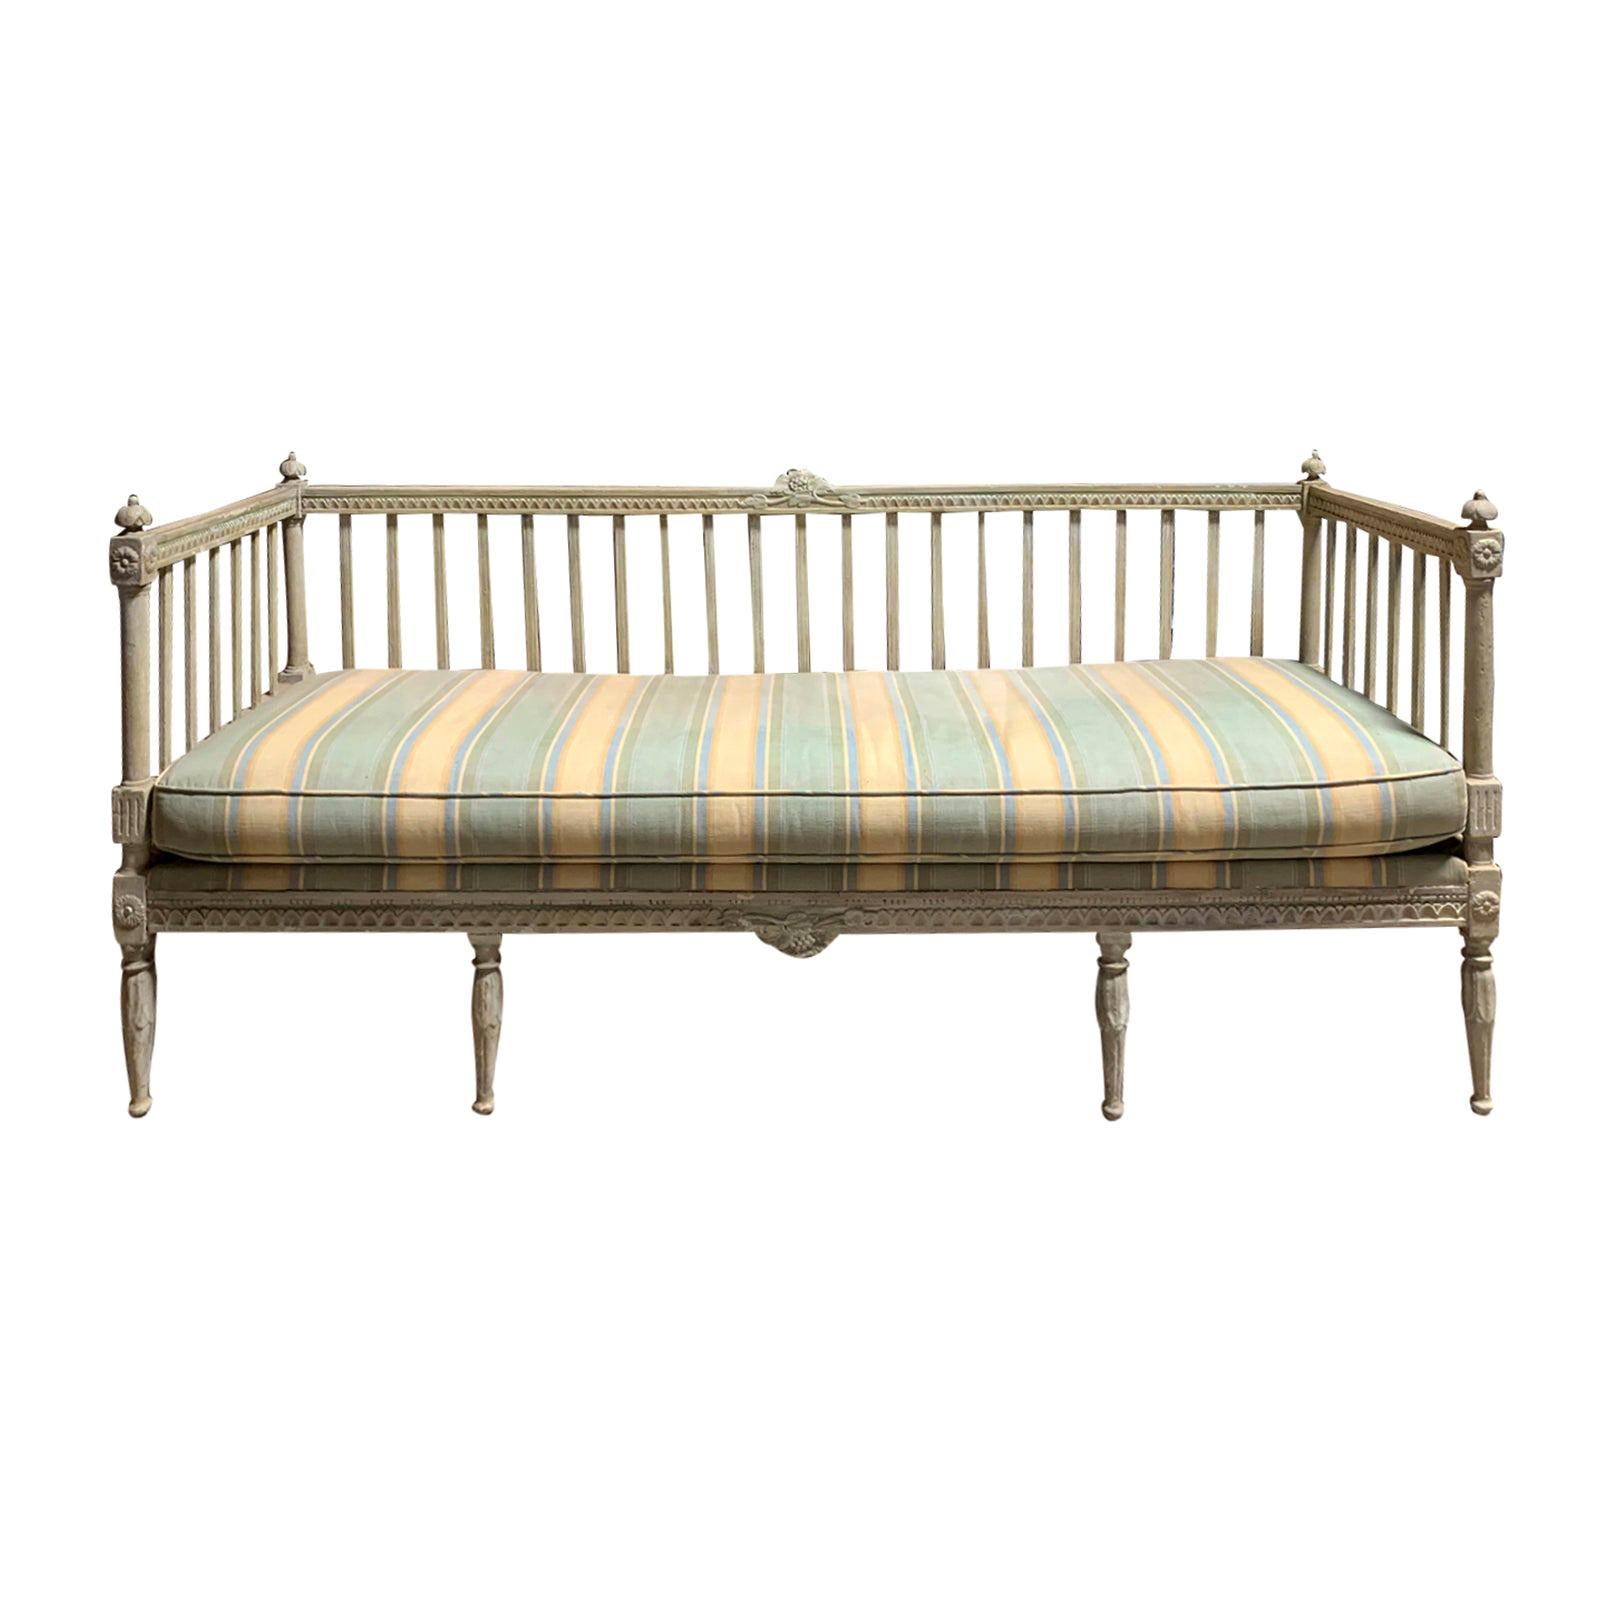 19th Century Swedish Painted Bench / Daybed / Sofa